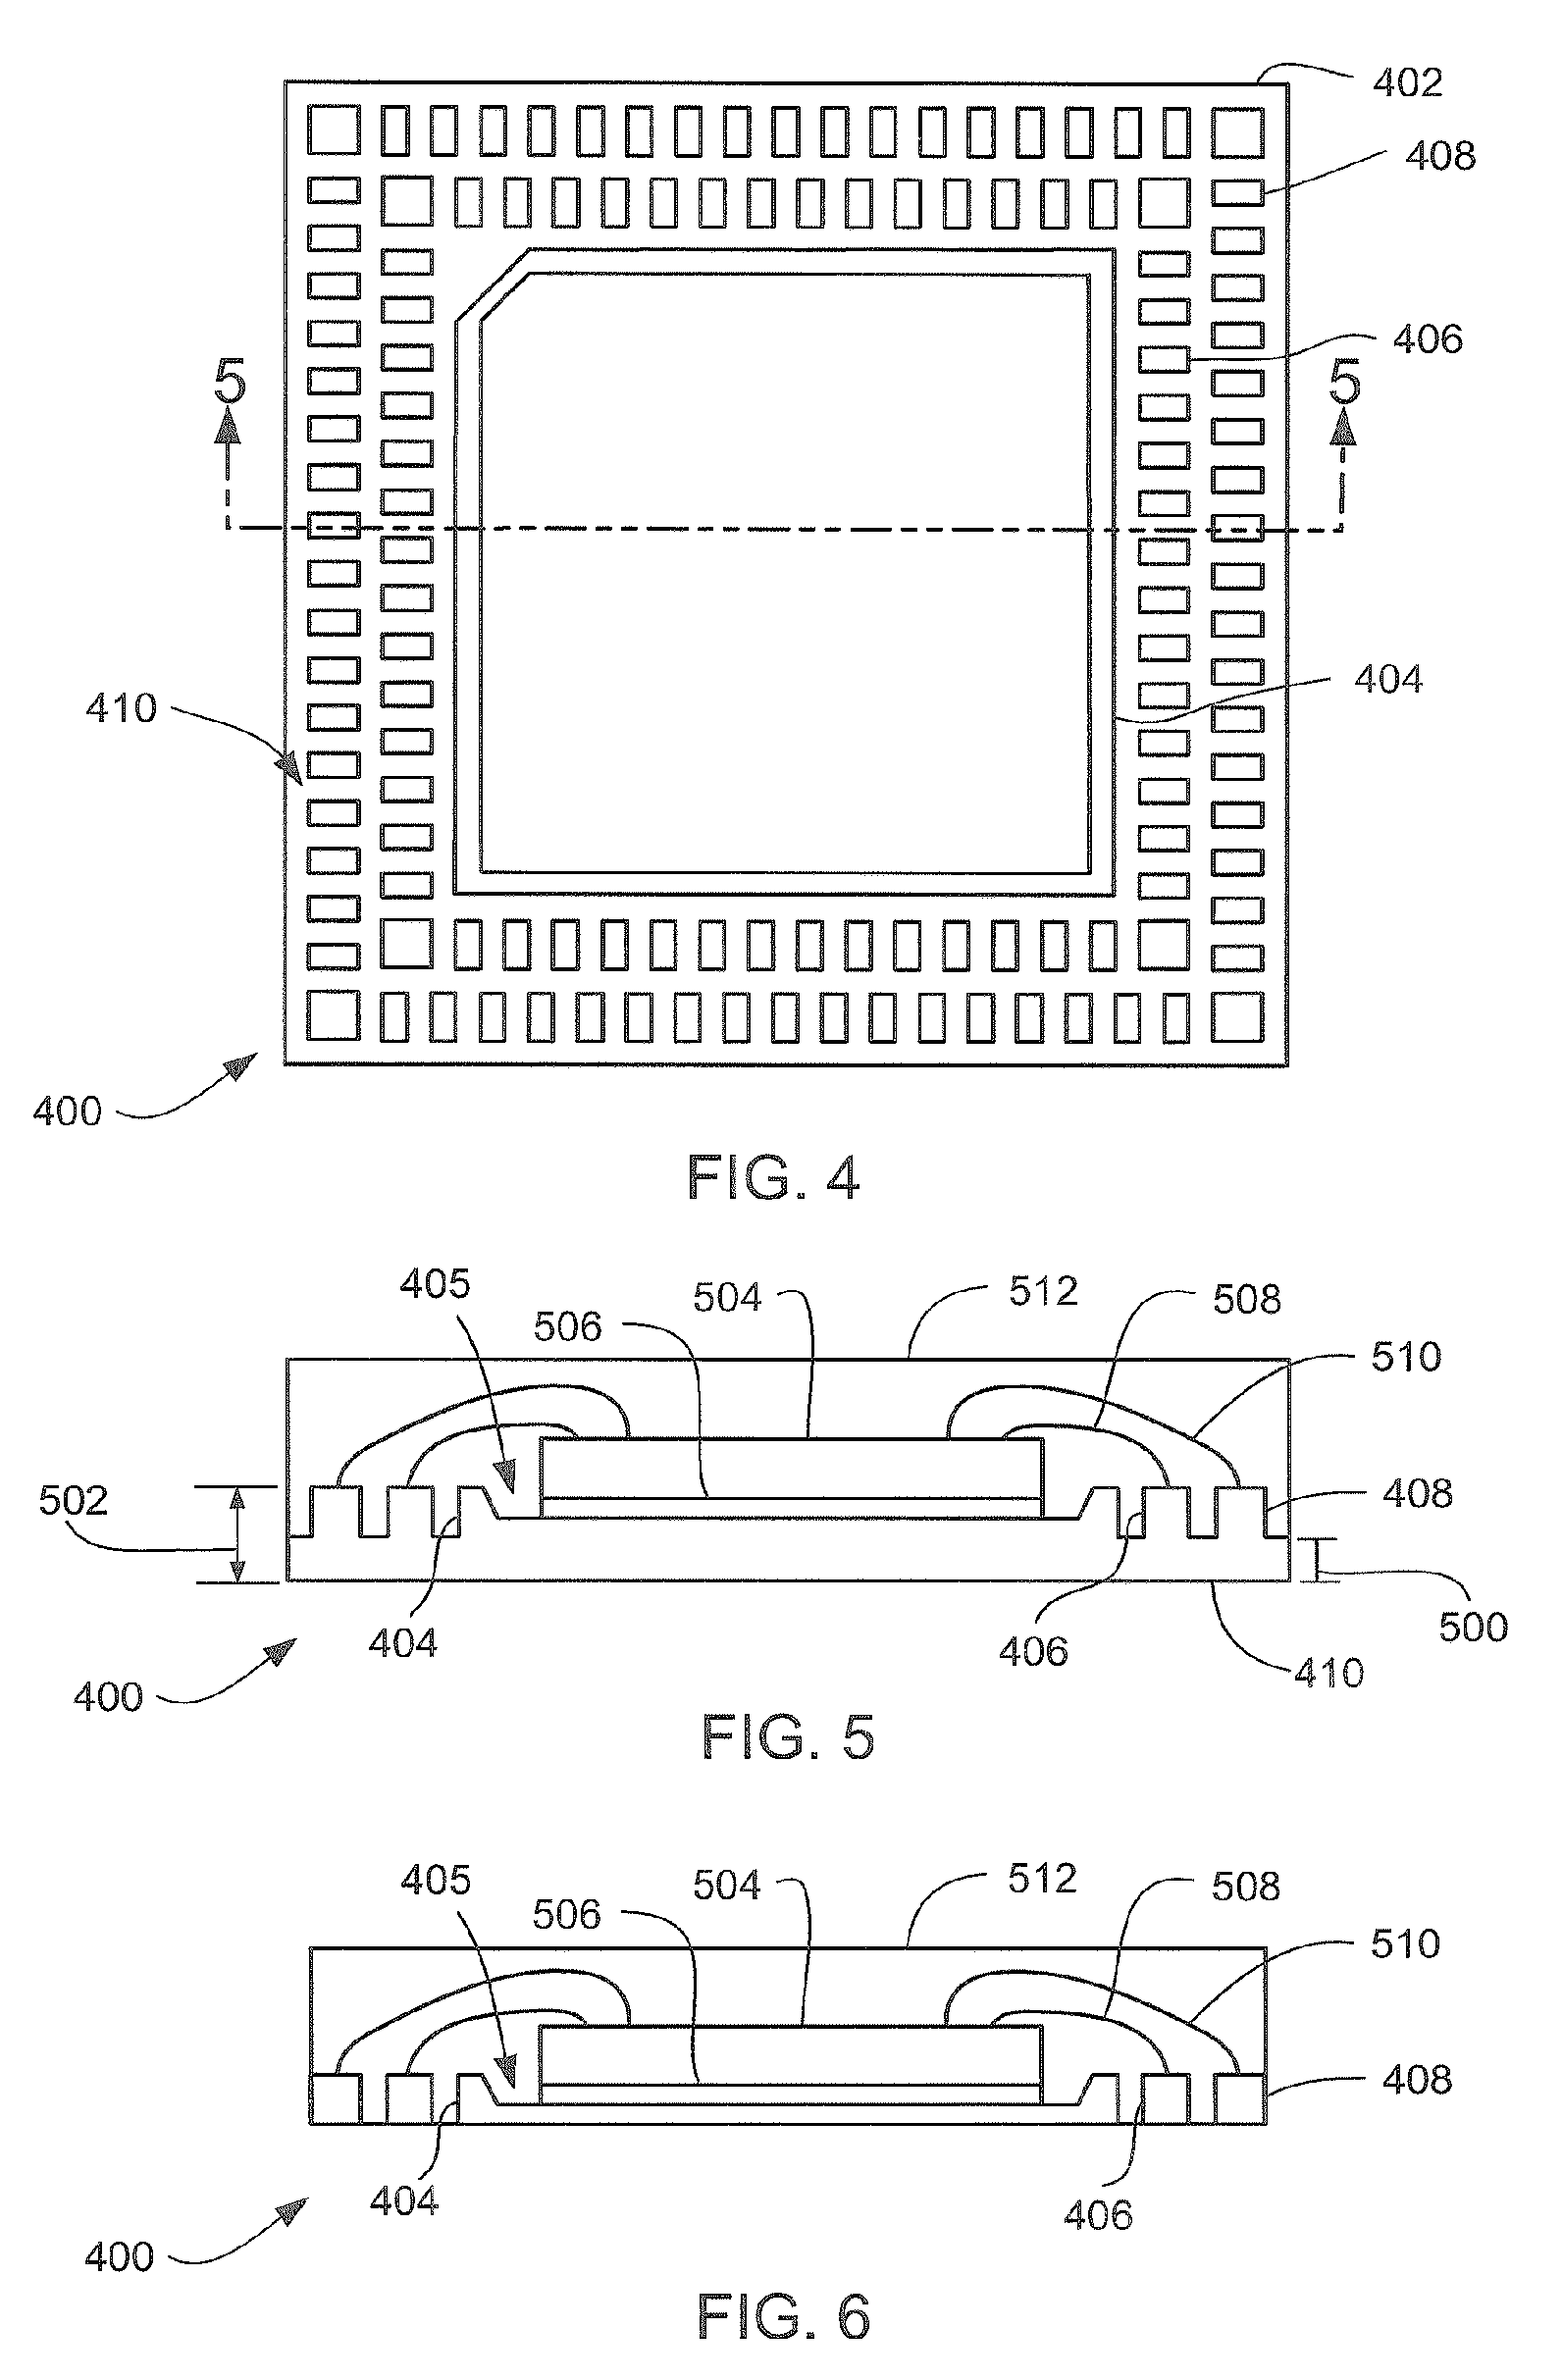 Integrated circuit package system using etched leadframe